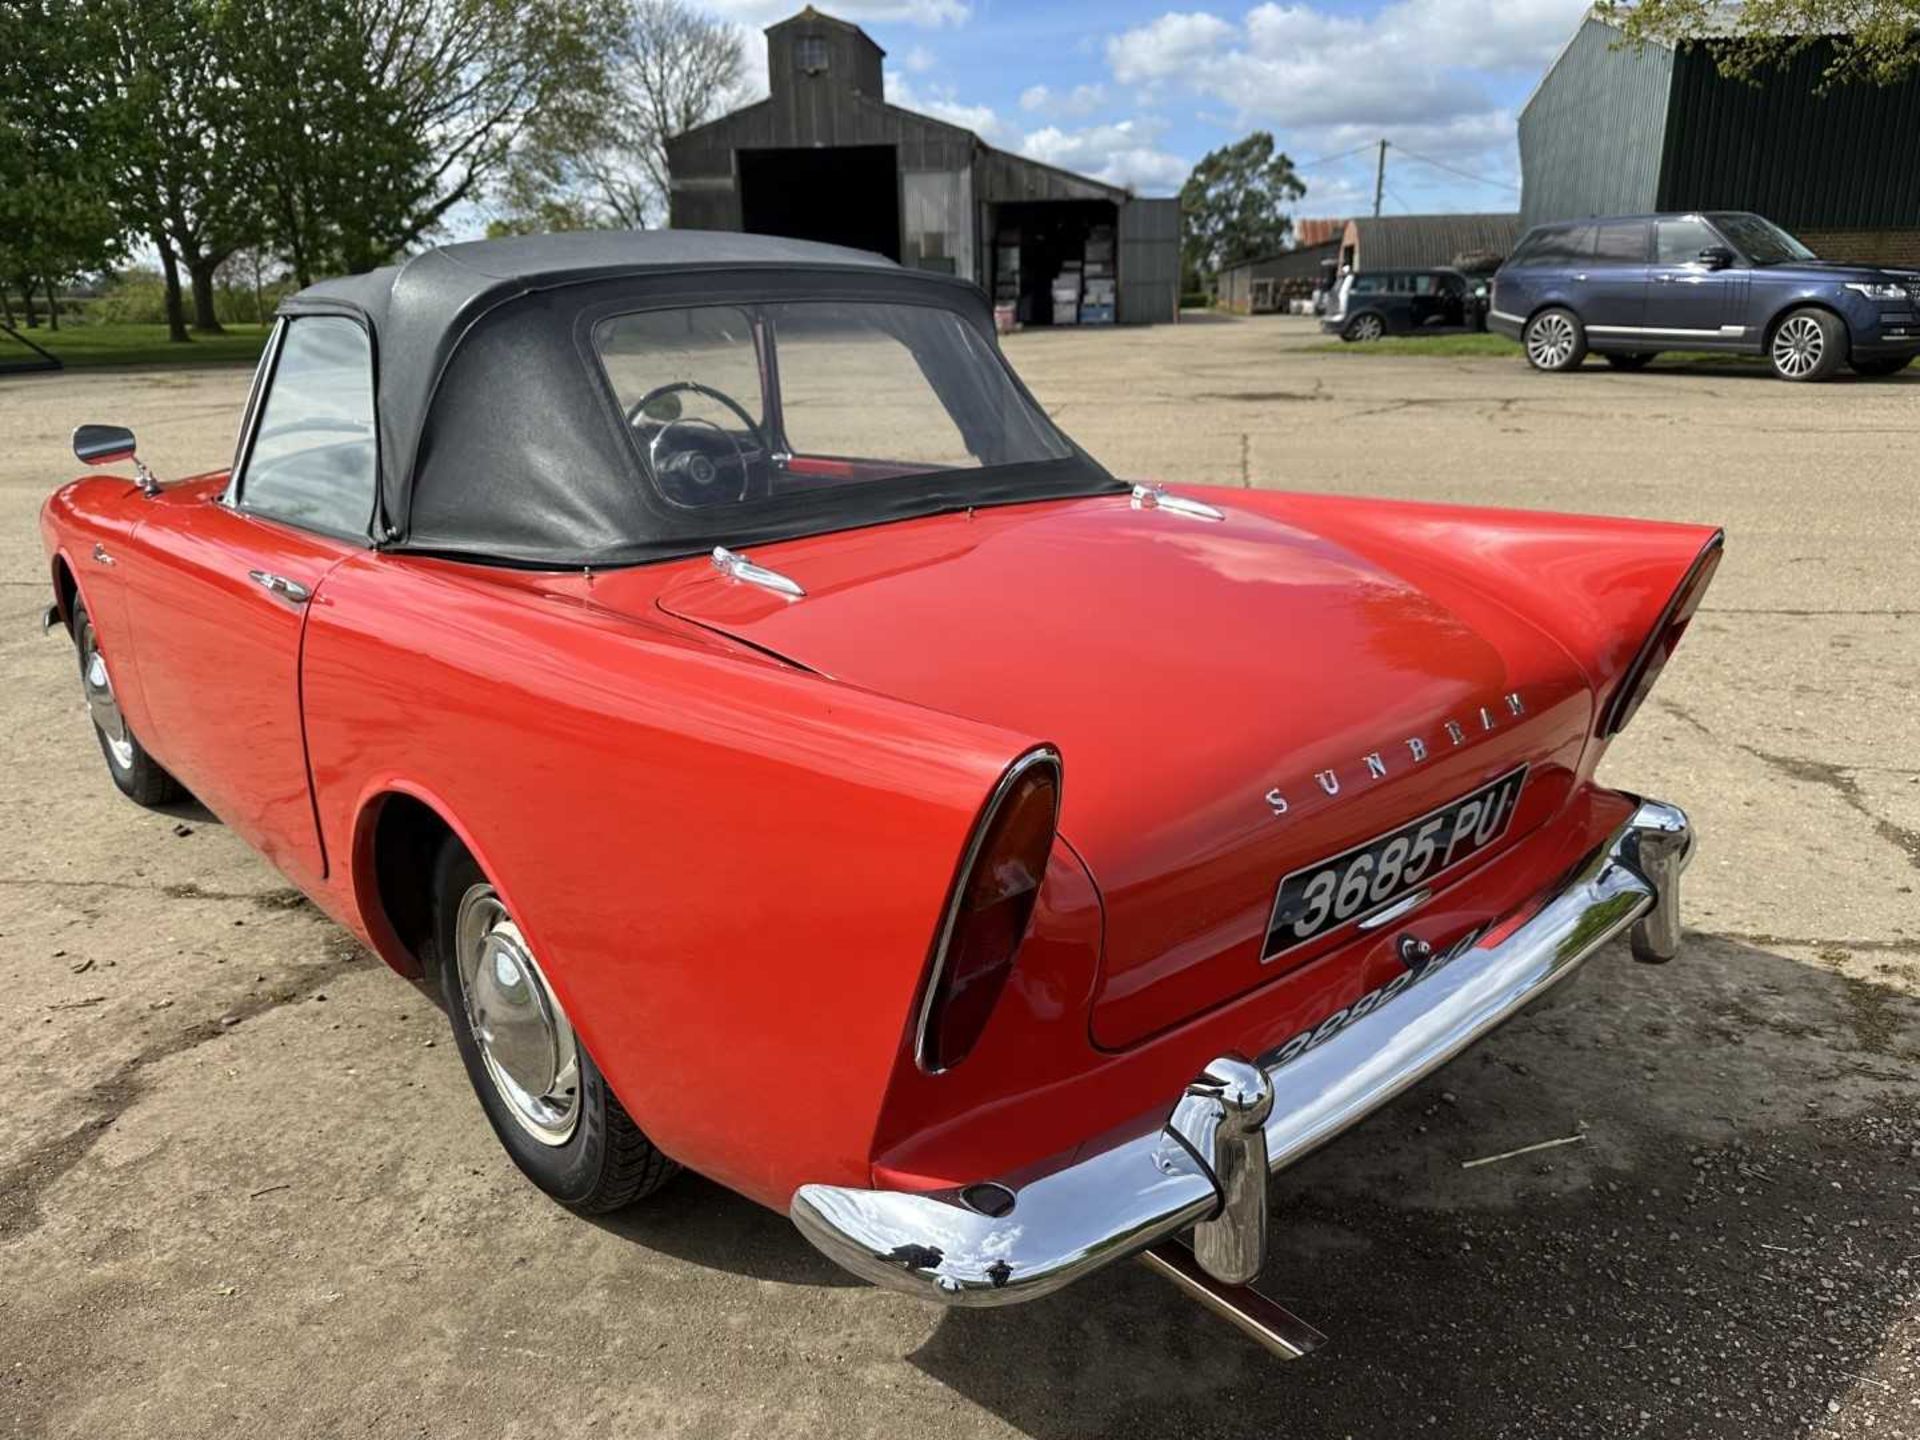 1960 Sunbeam Alpine sports convertible, 1600cc engine, manual gearbox with overdrive, reg. no. 3685 - Image 8 of 30